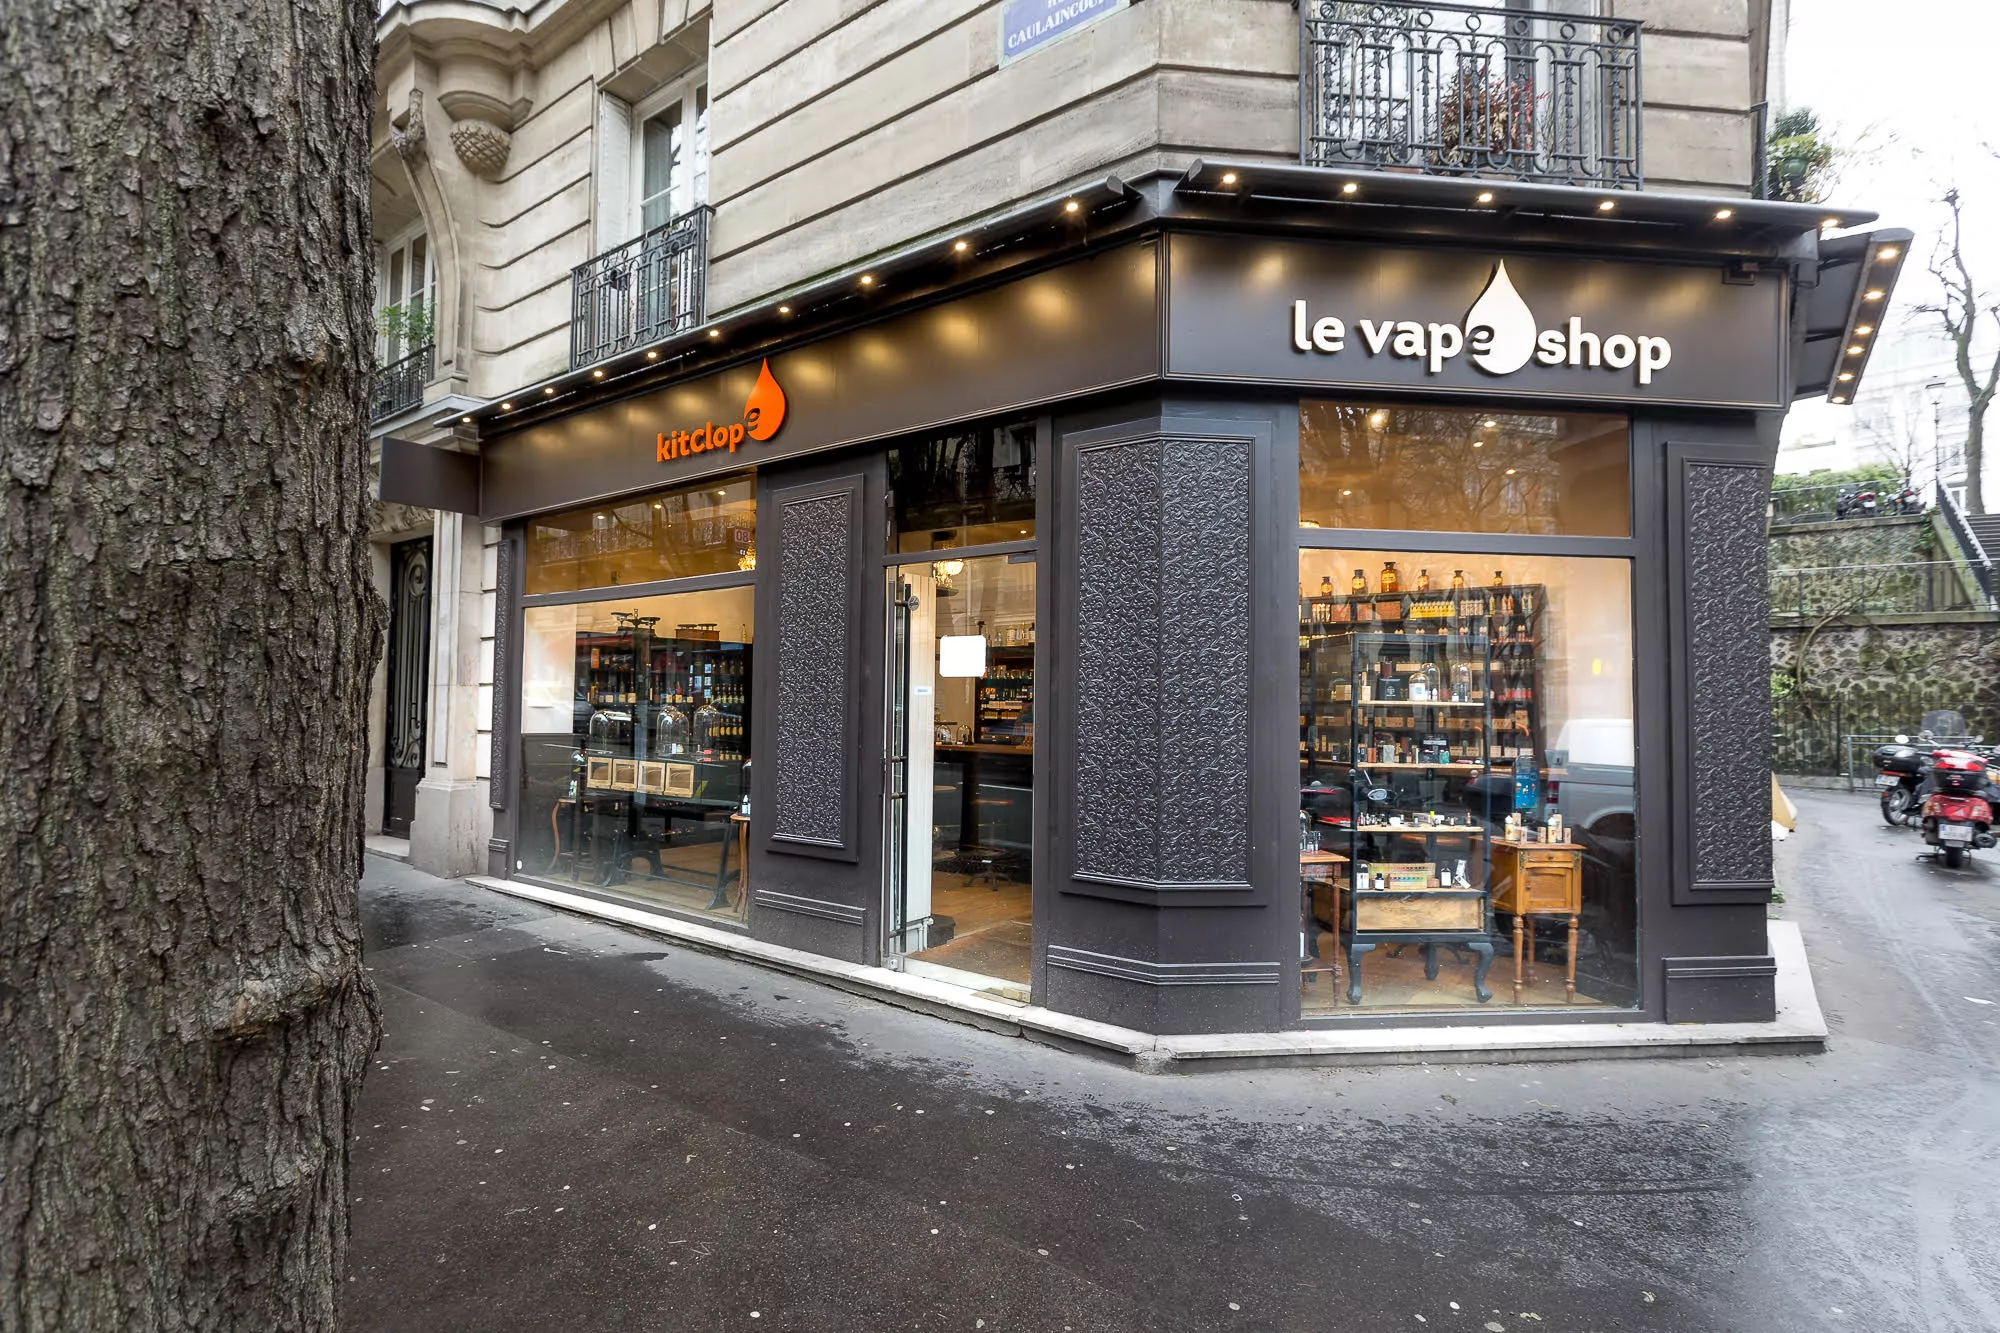 Kitclope in France, europe | e-Cigarettes - Country Helper